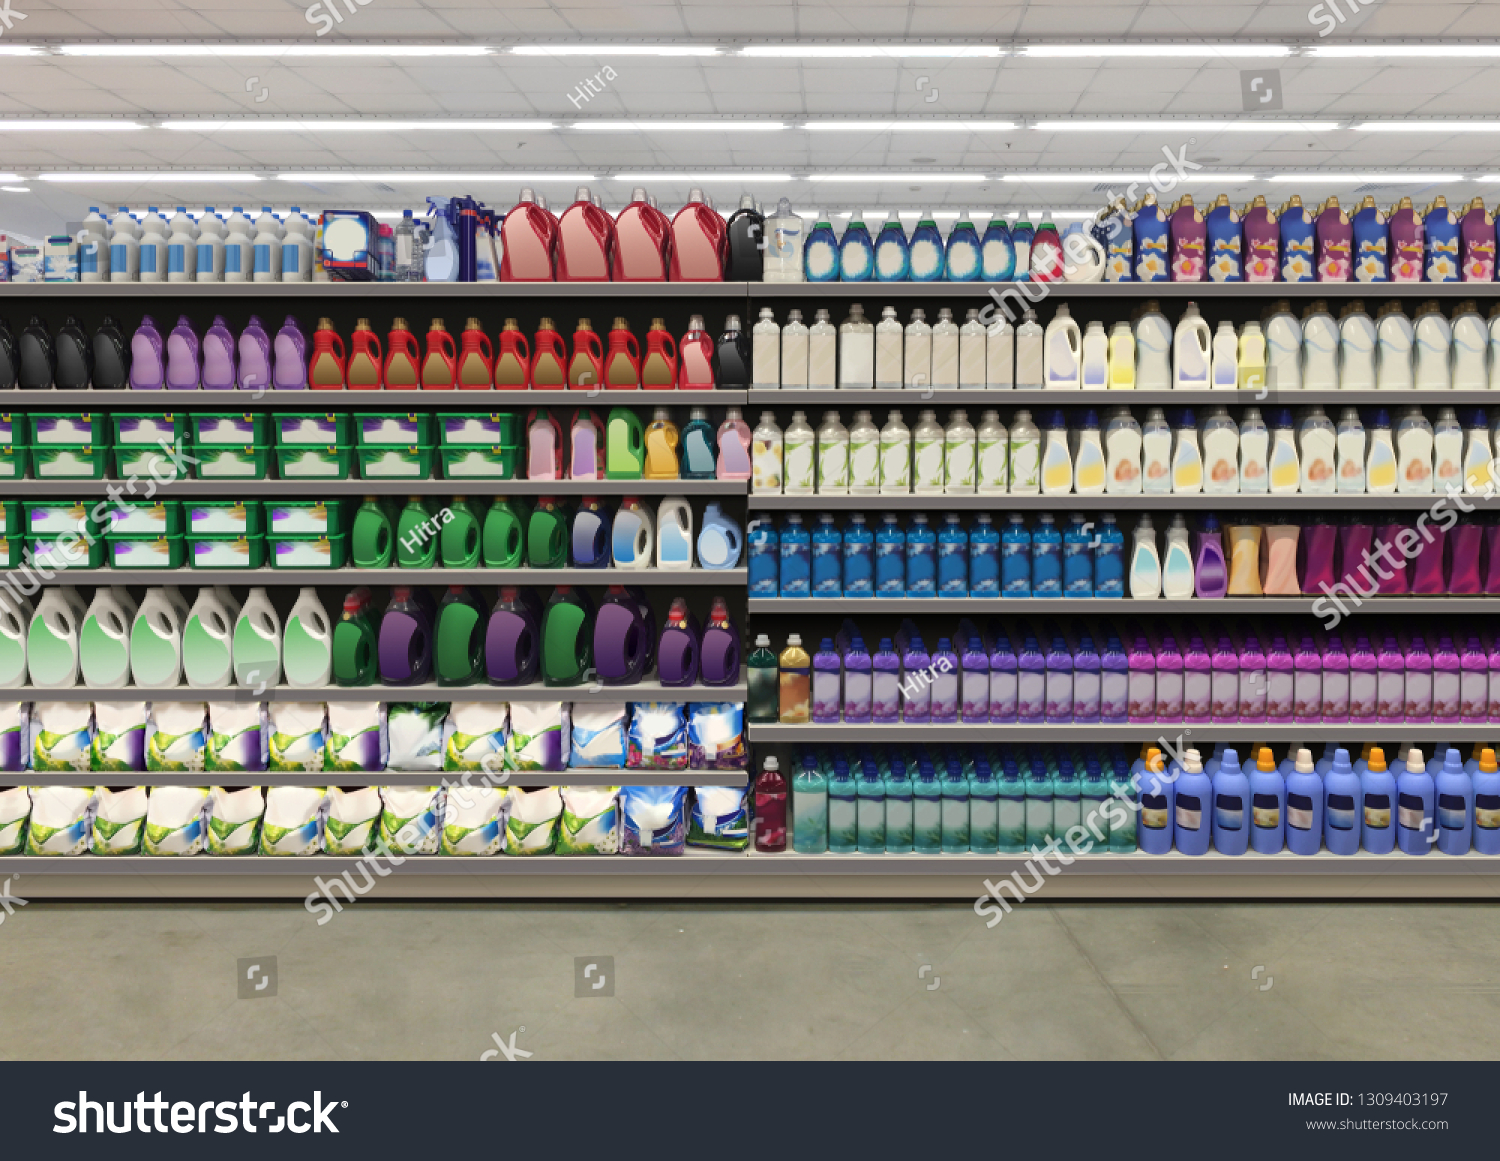 Washing up powder and liquid detergent on shelf In supermarket with colorful and blanco labels. Suitable for presenting new  detergent product and new designs of labels among many others. #1309403197